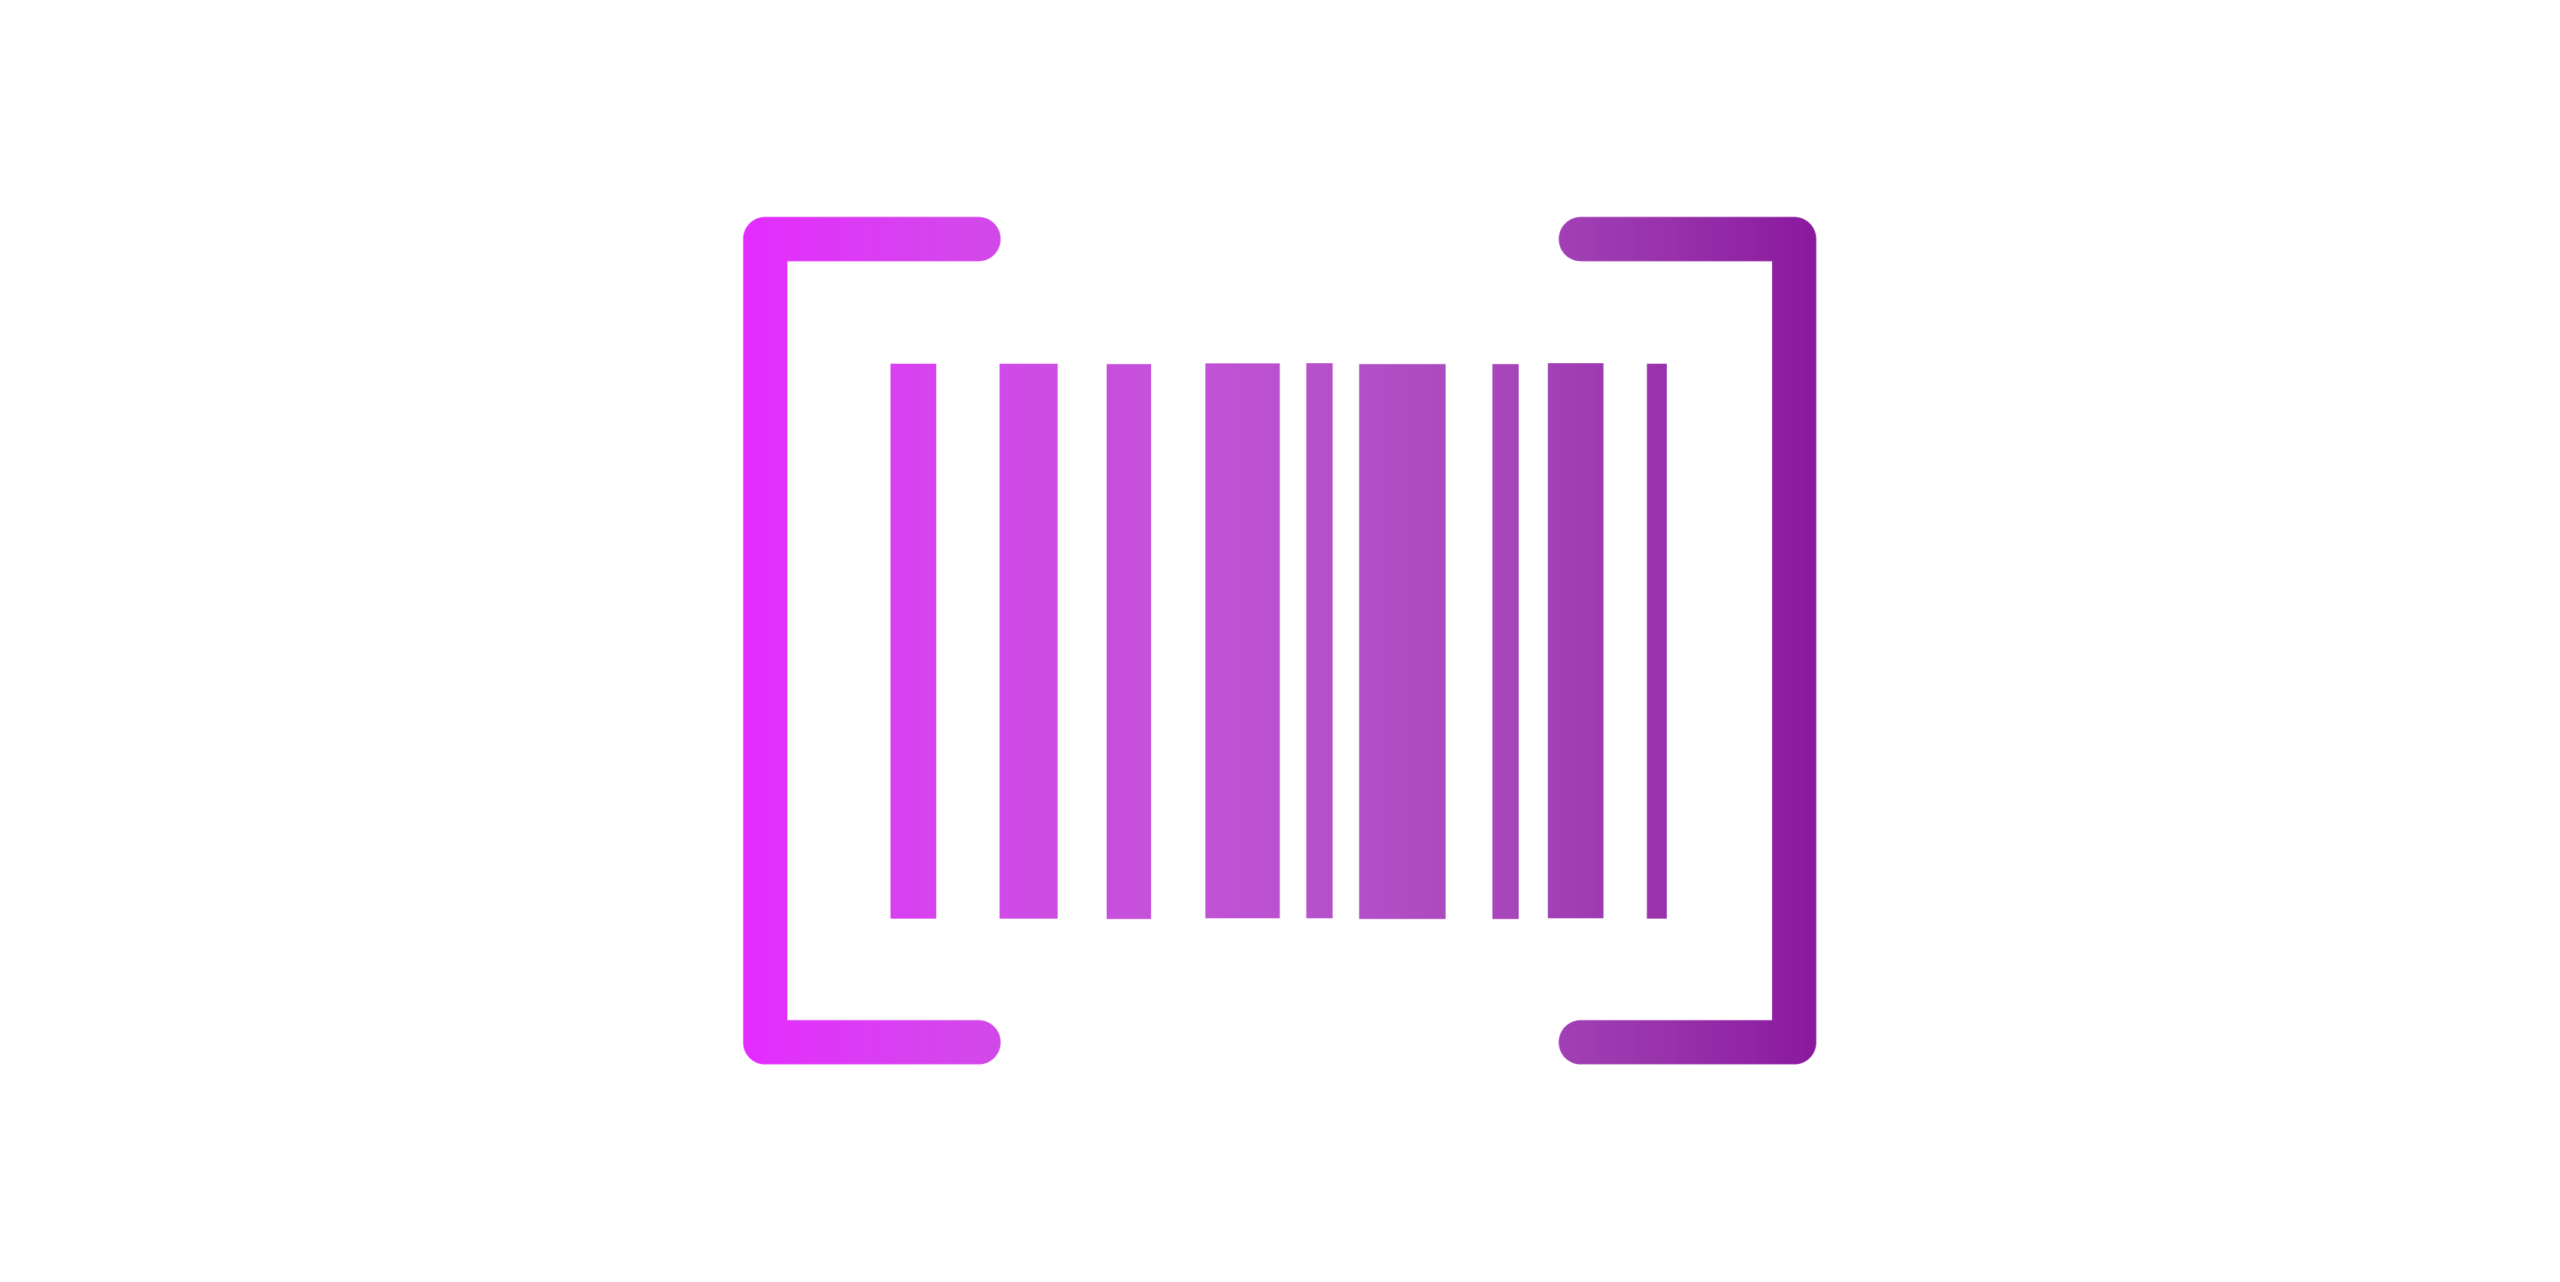 An icon of a barcode